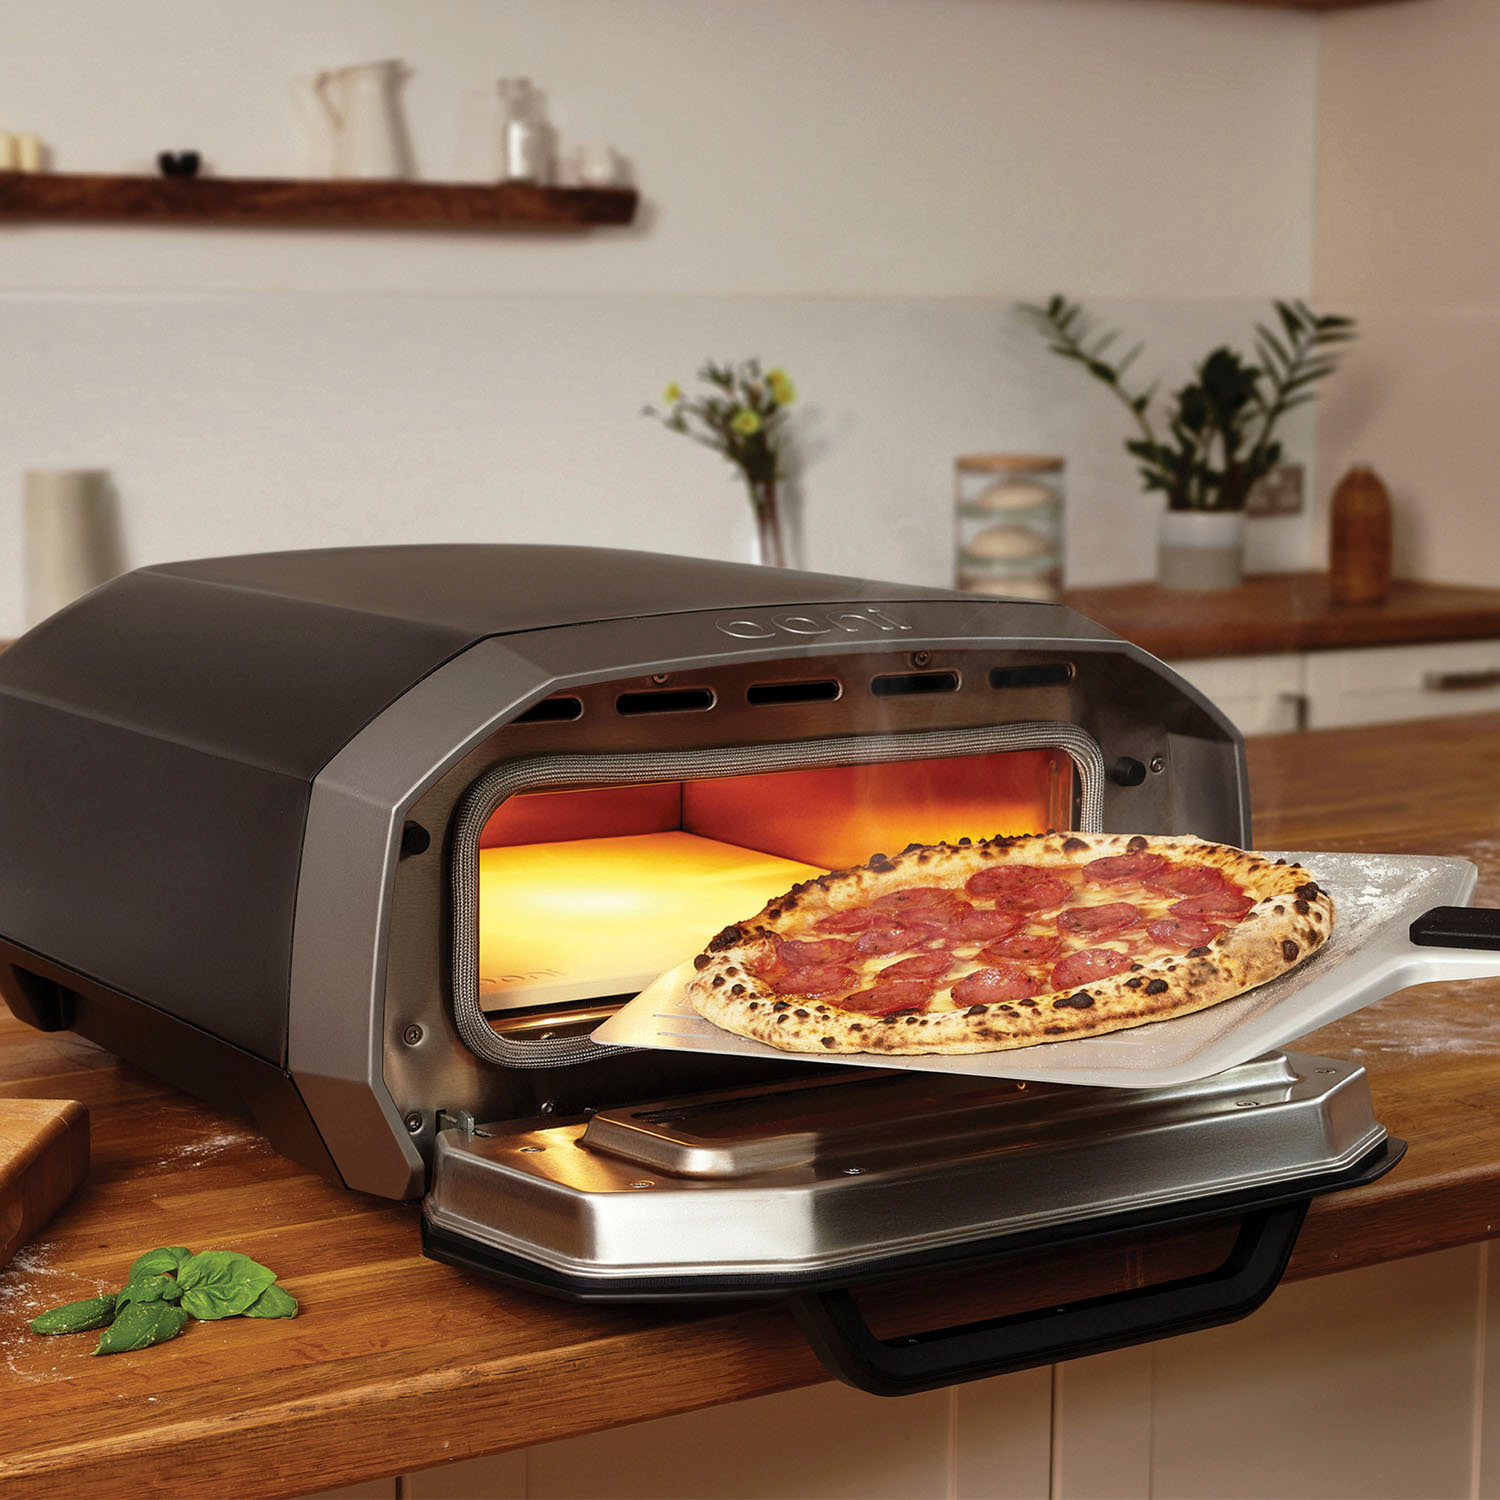 Ooni Pizza Oven Review: The Ooni Volt 12 Put To The Test